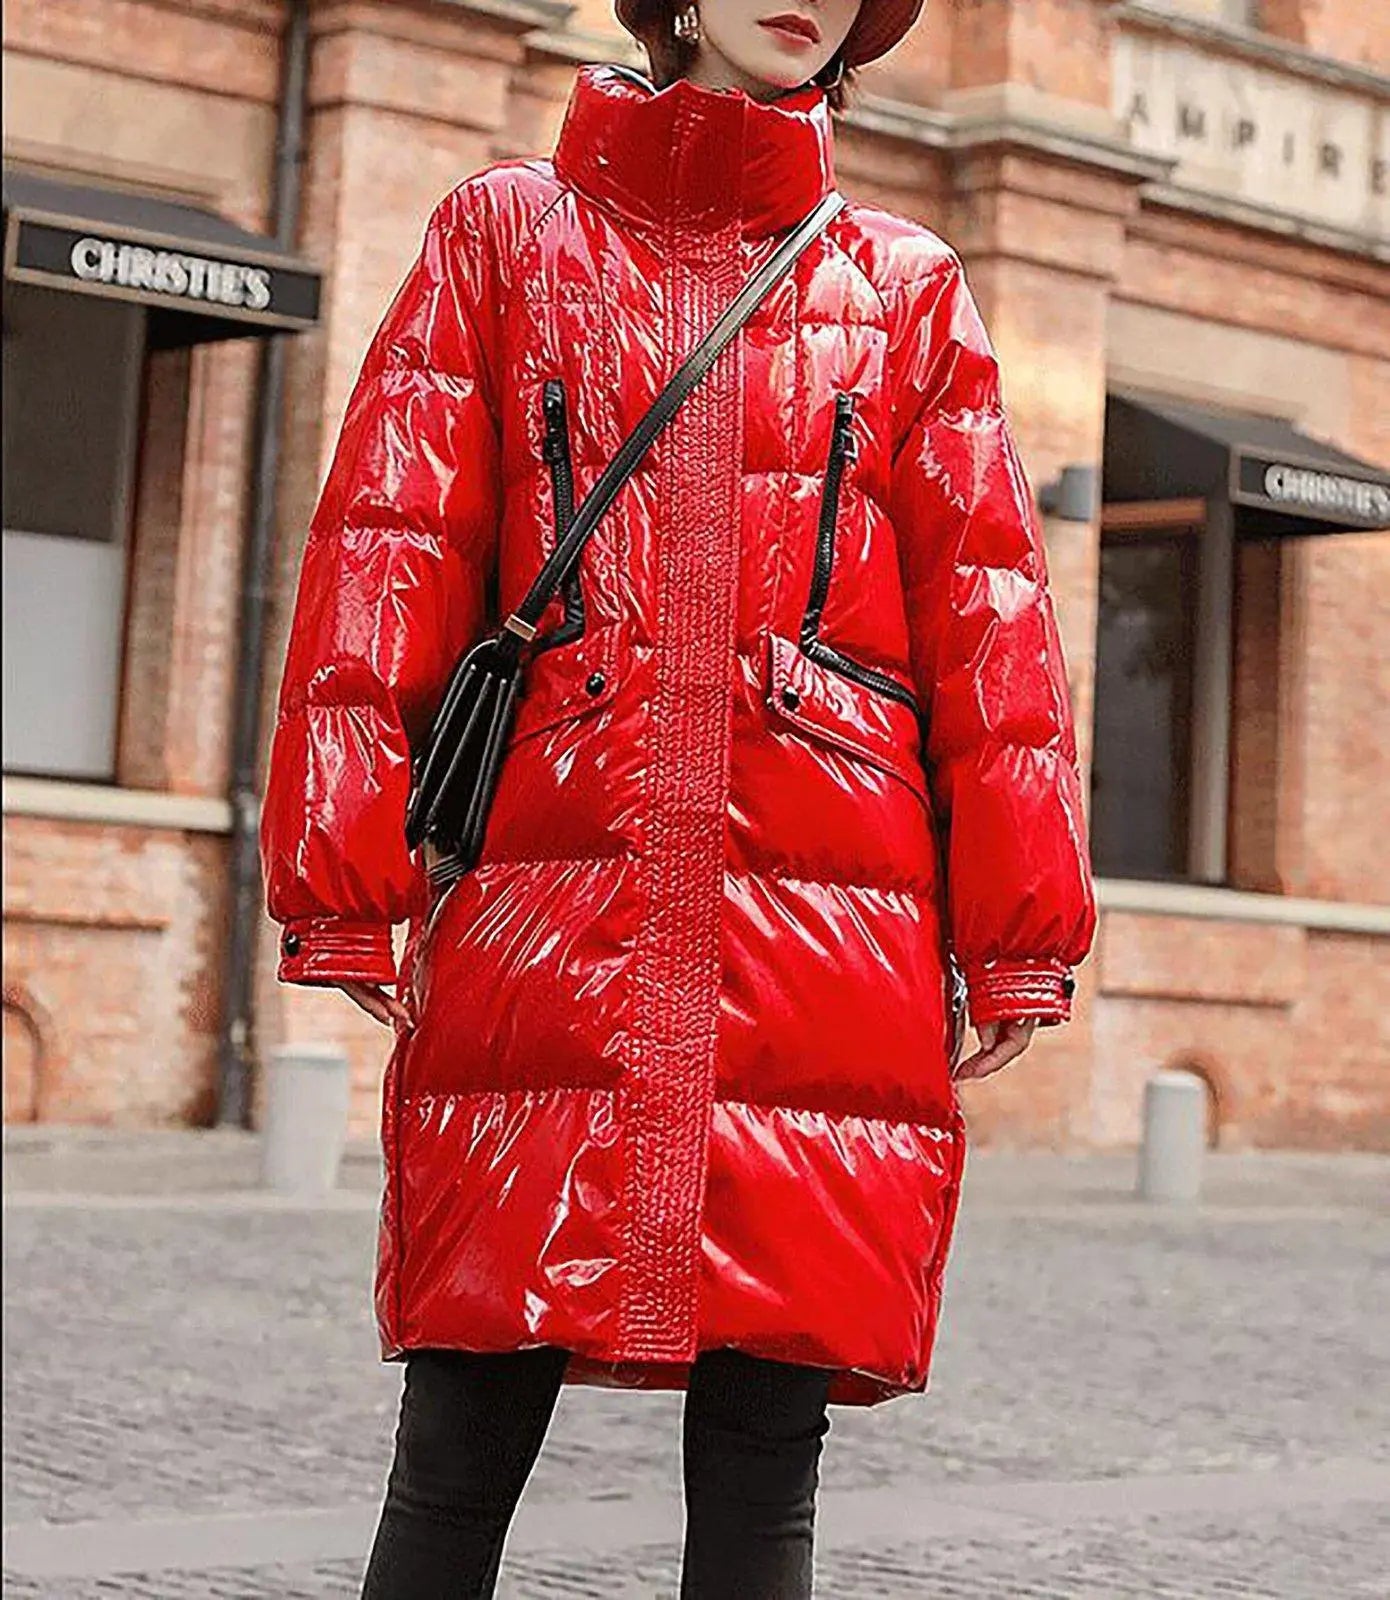 Women's Oversize Shiny Down Coat,Plus Size Down Jacket,Red Down Puffer  Coat,Black Down Jacket,Quilted Down Parka Jacket,Warm Winter coat